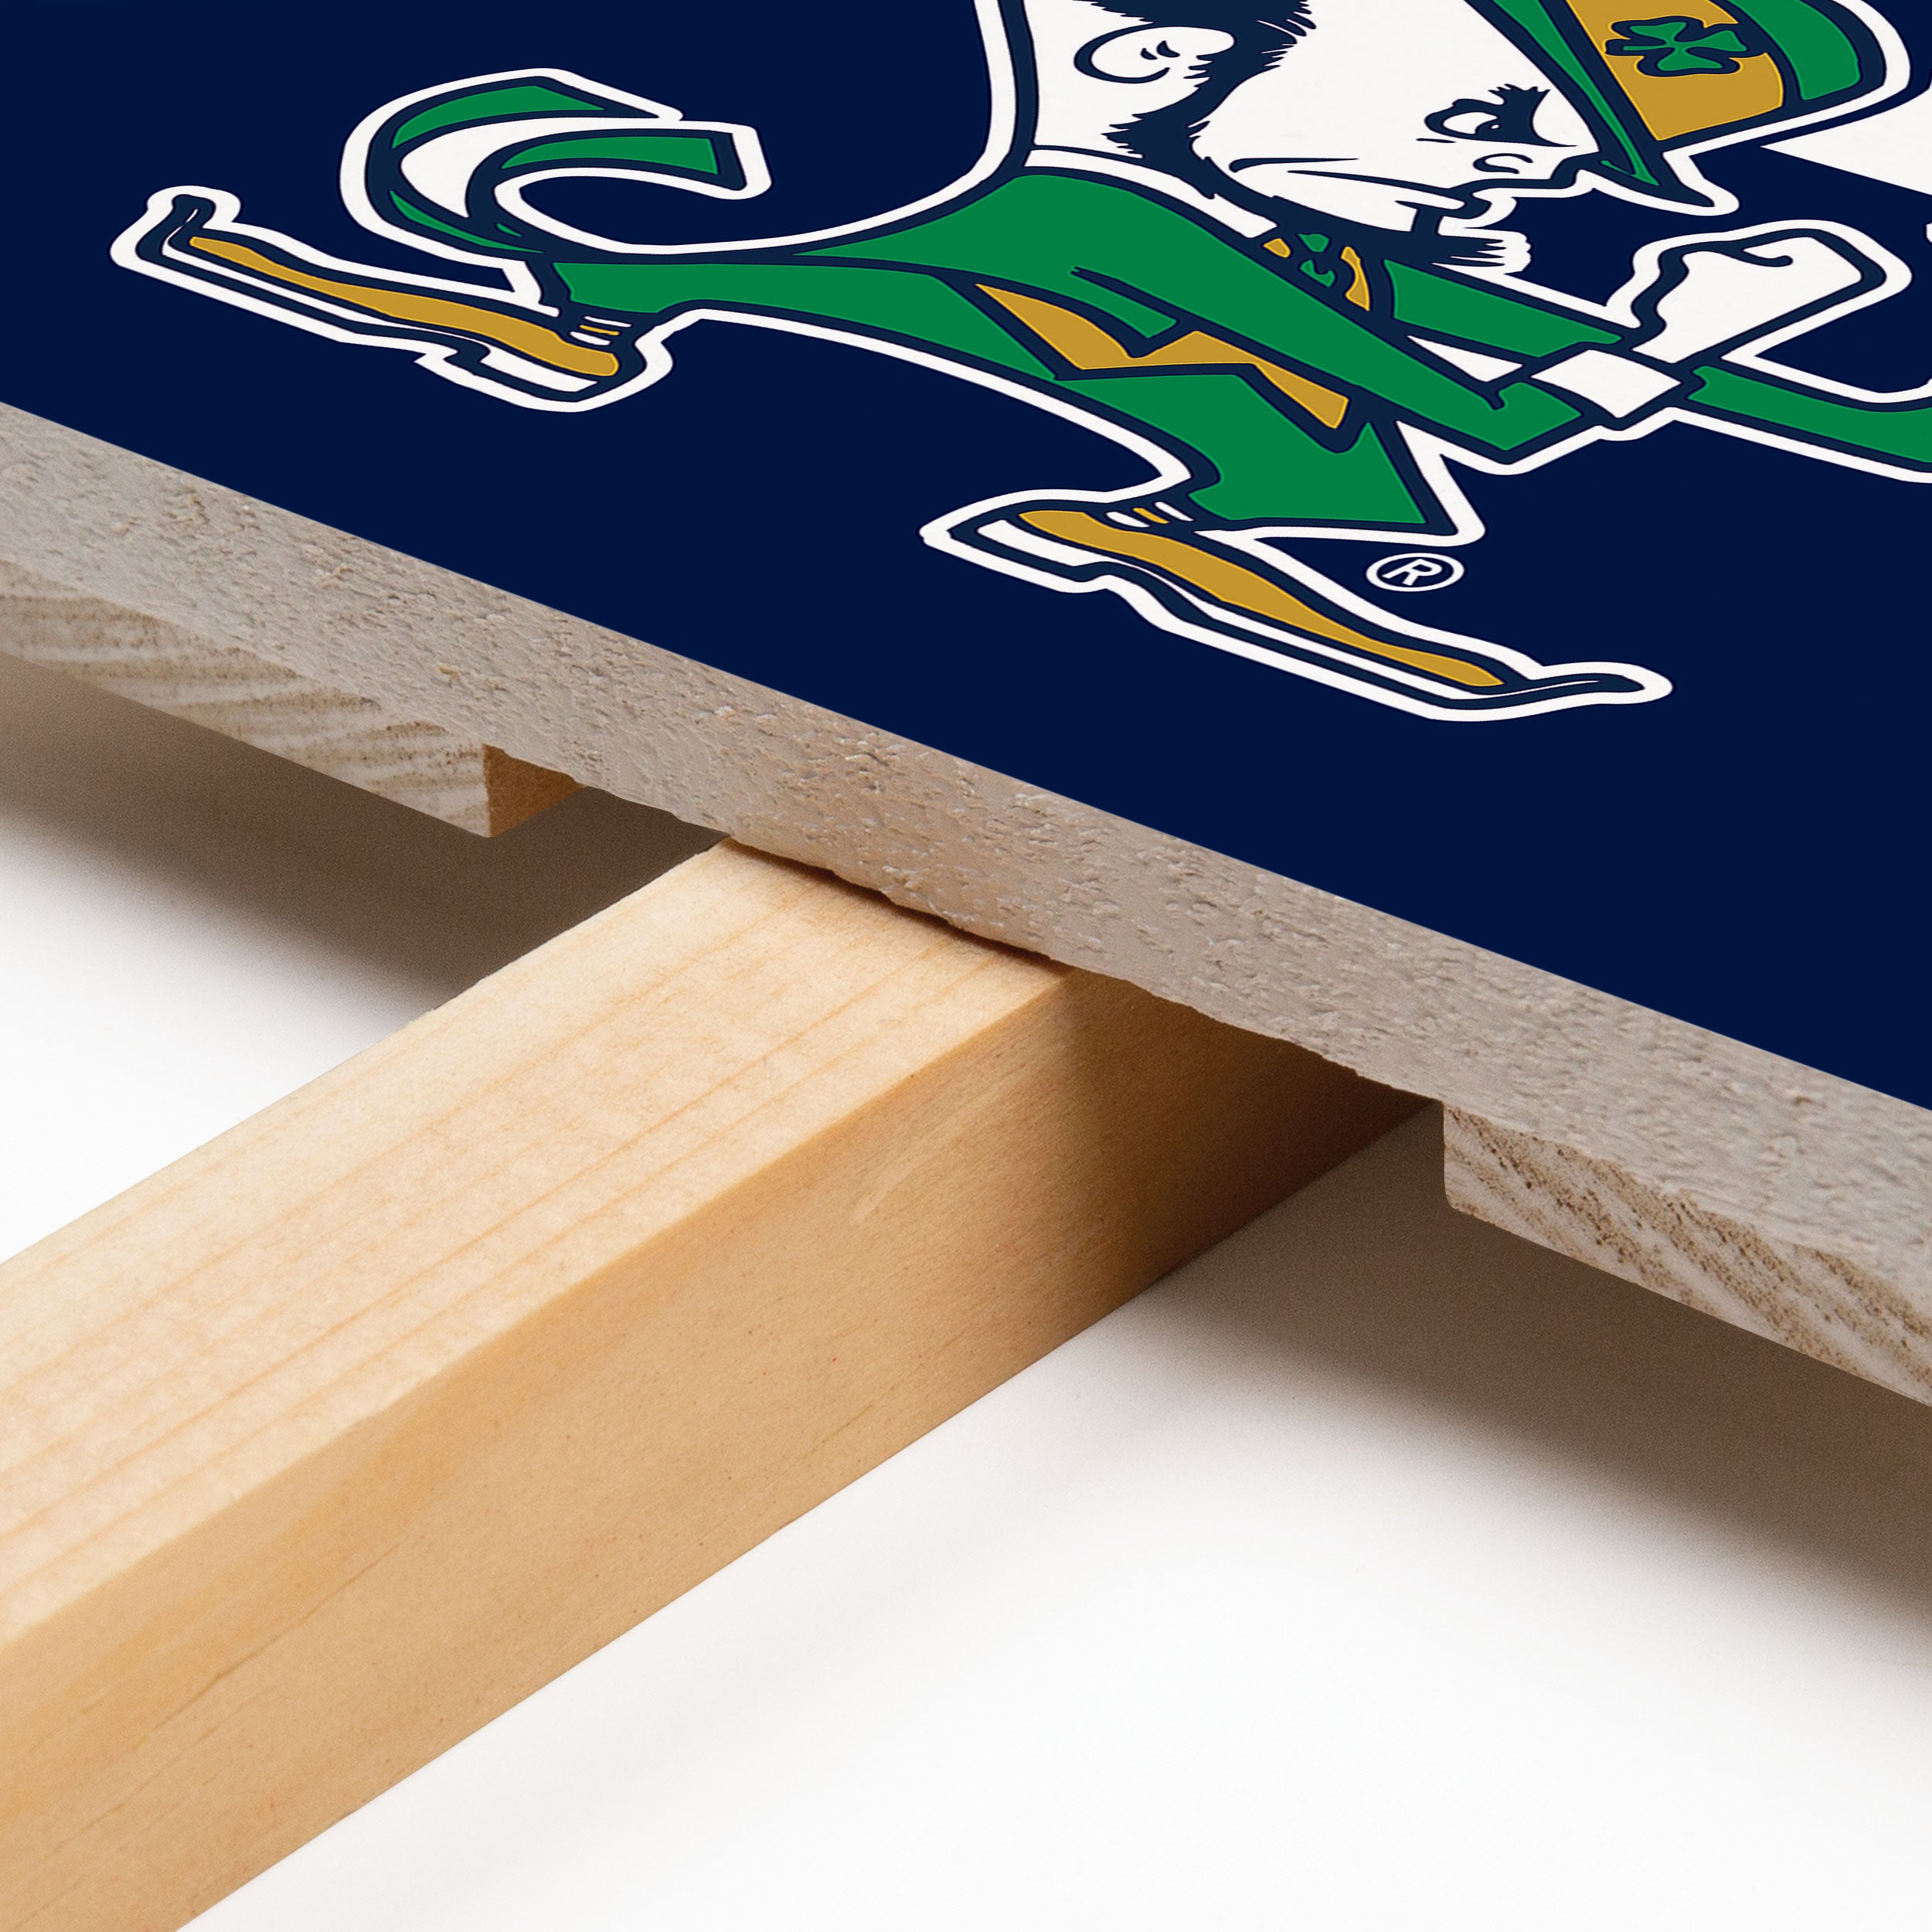 University of Notre Dame Chant and Logo